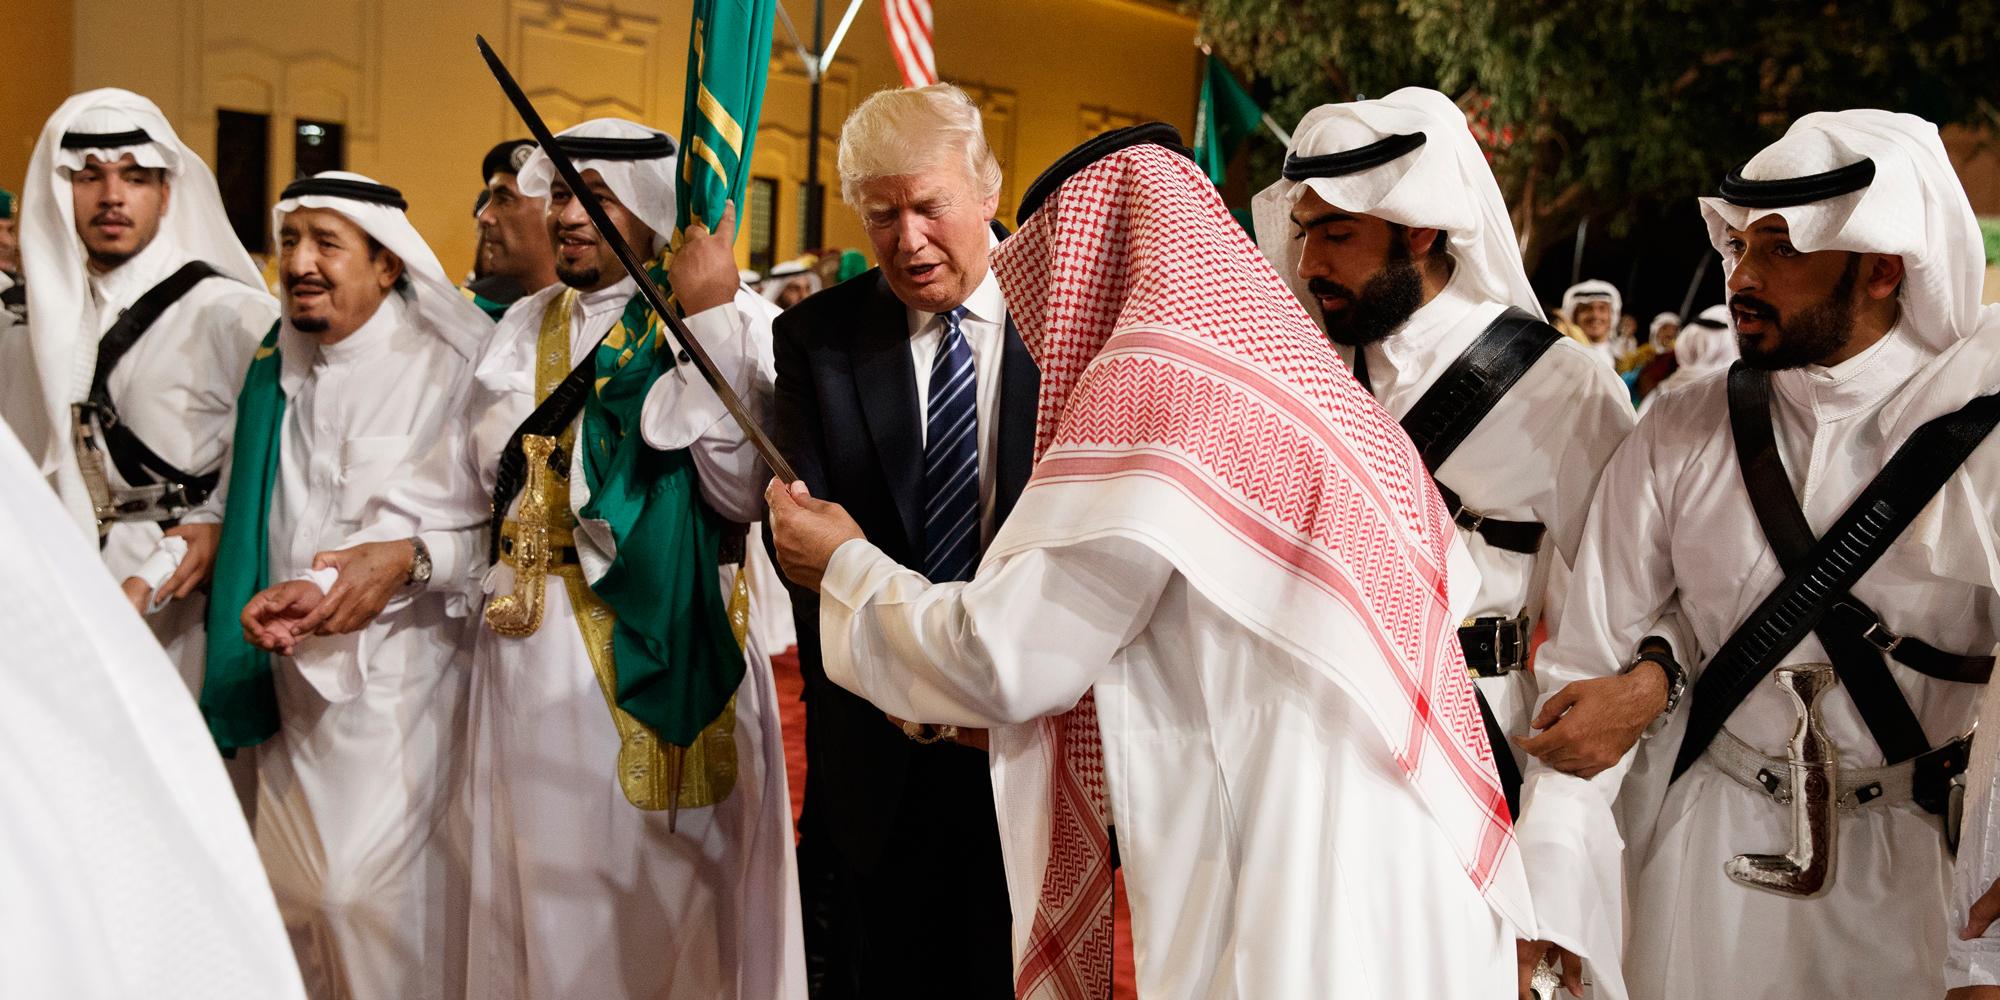 One of the key economic questions this week is whether Trump's trip to Saudi Arabia will affect oil prices